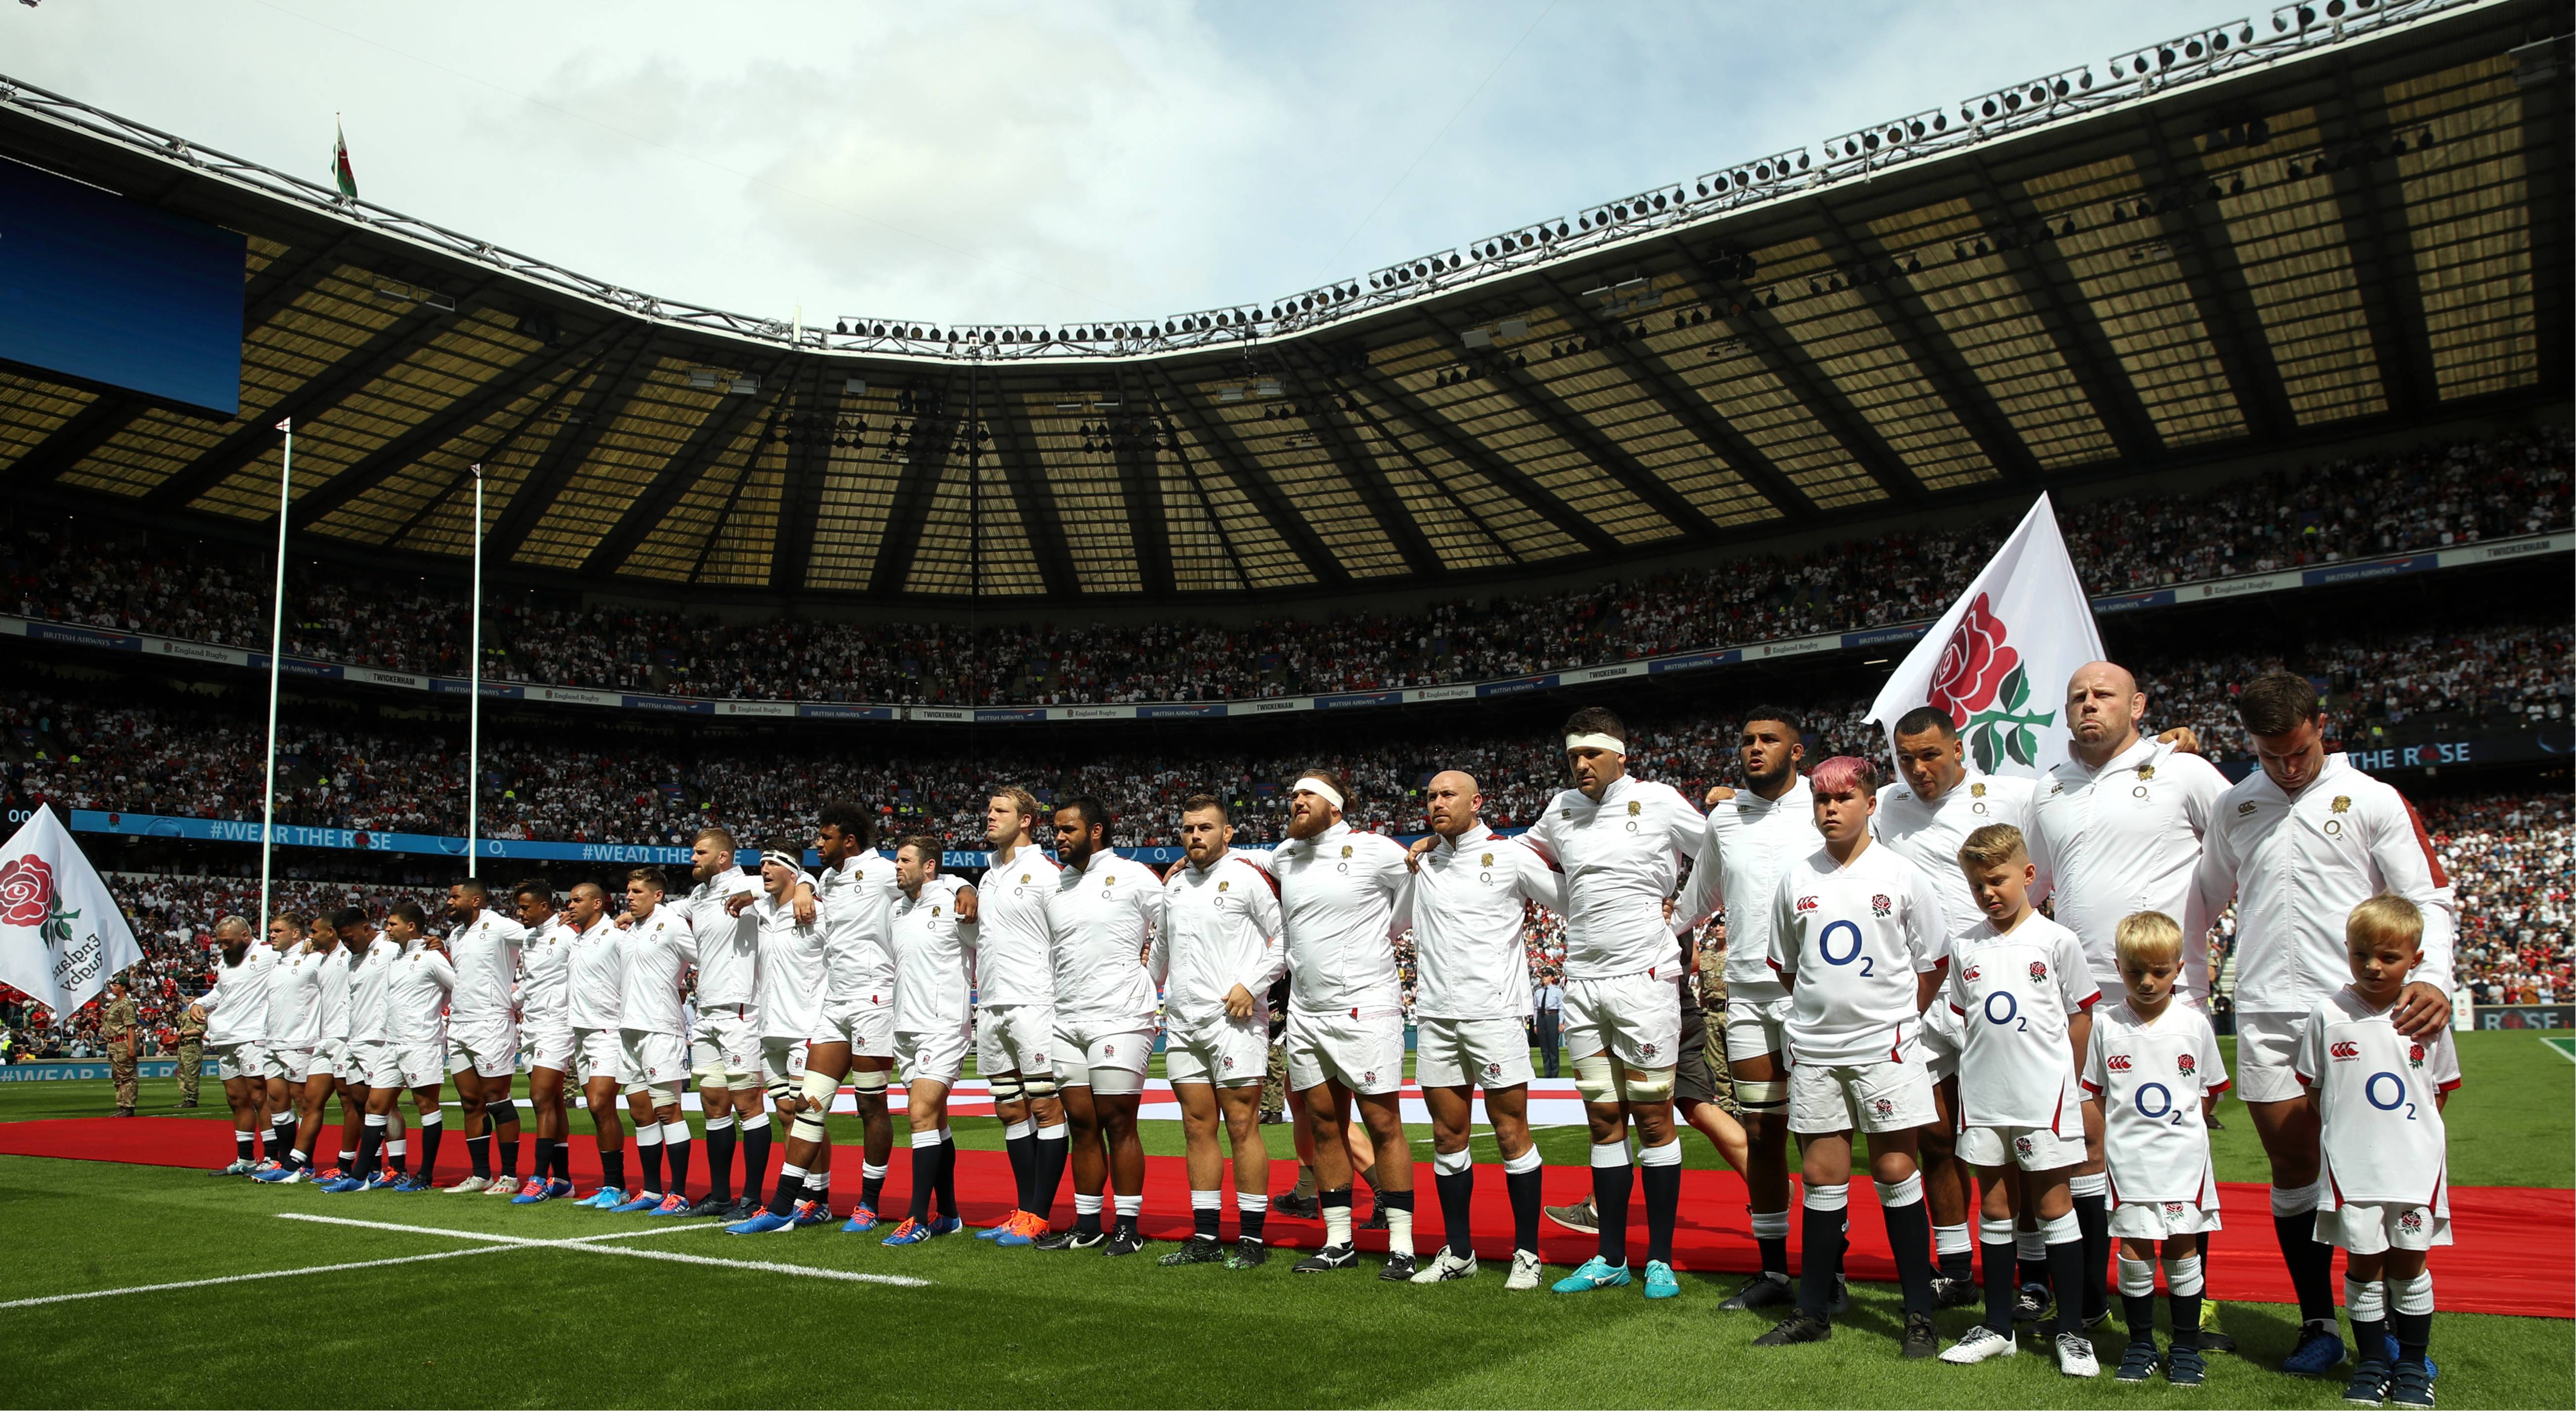 rugby england